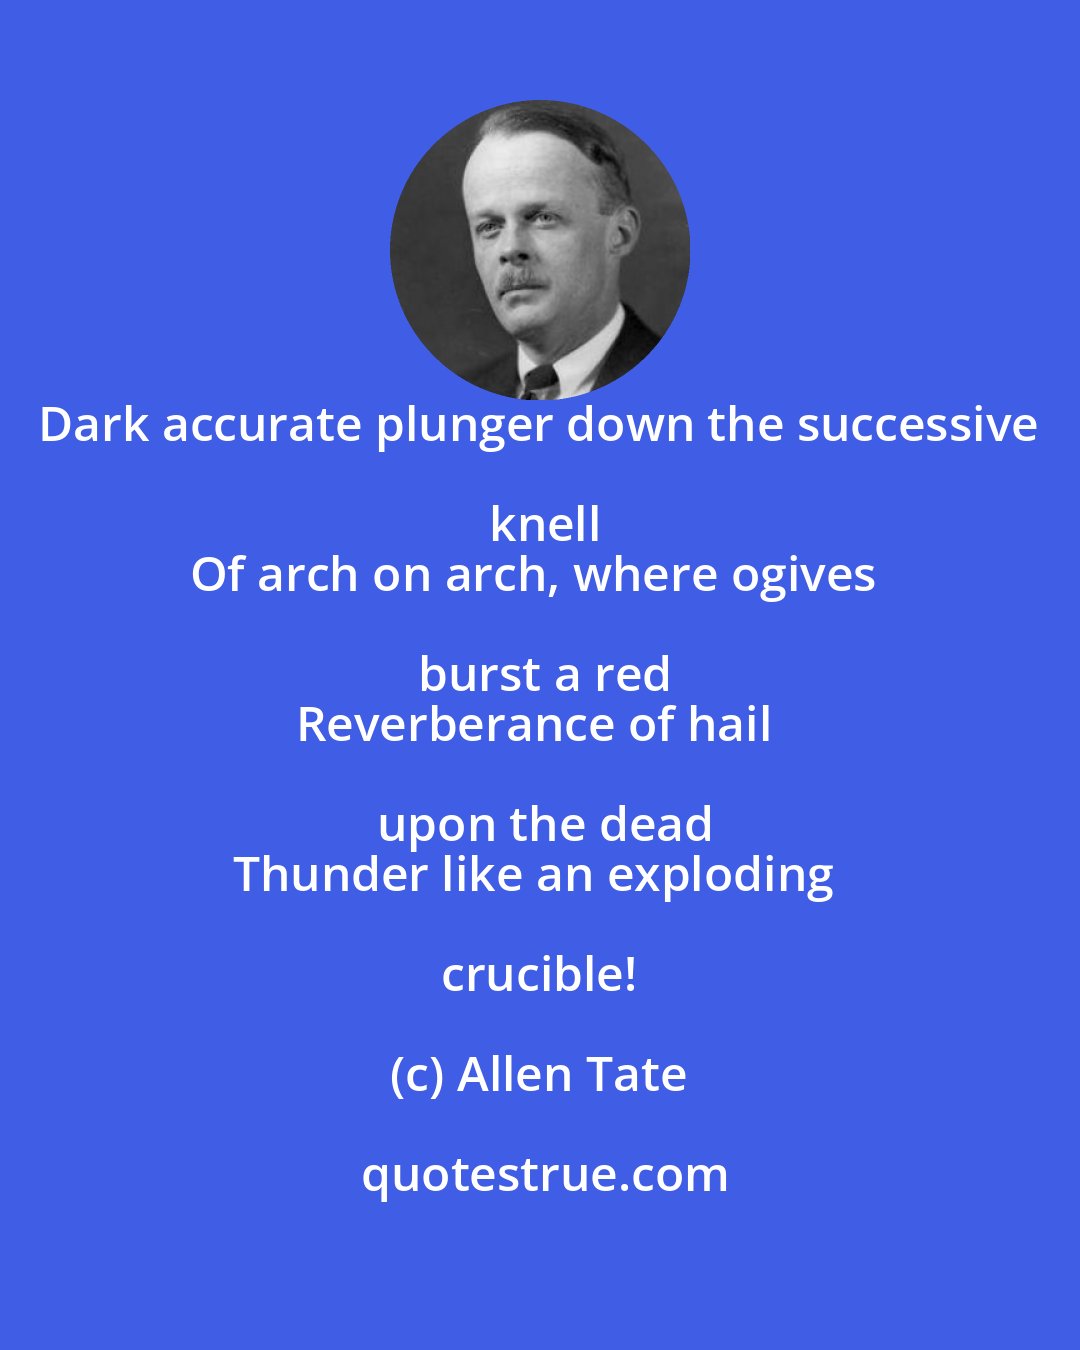 Allen Tate: Dark accurate plunger down the successive knell
Of arch on arch, where ogives burst a red
Reverberance of hail upon the dead
Thunder like an exploding crucible!